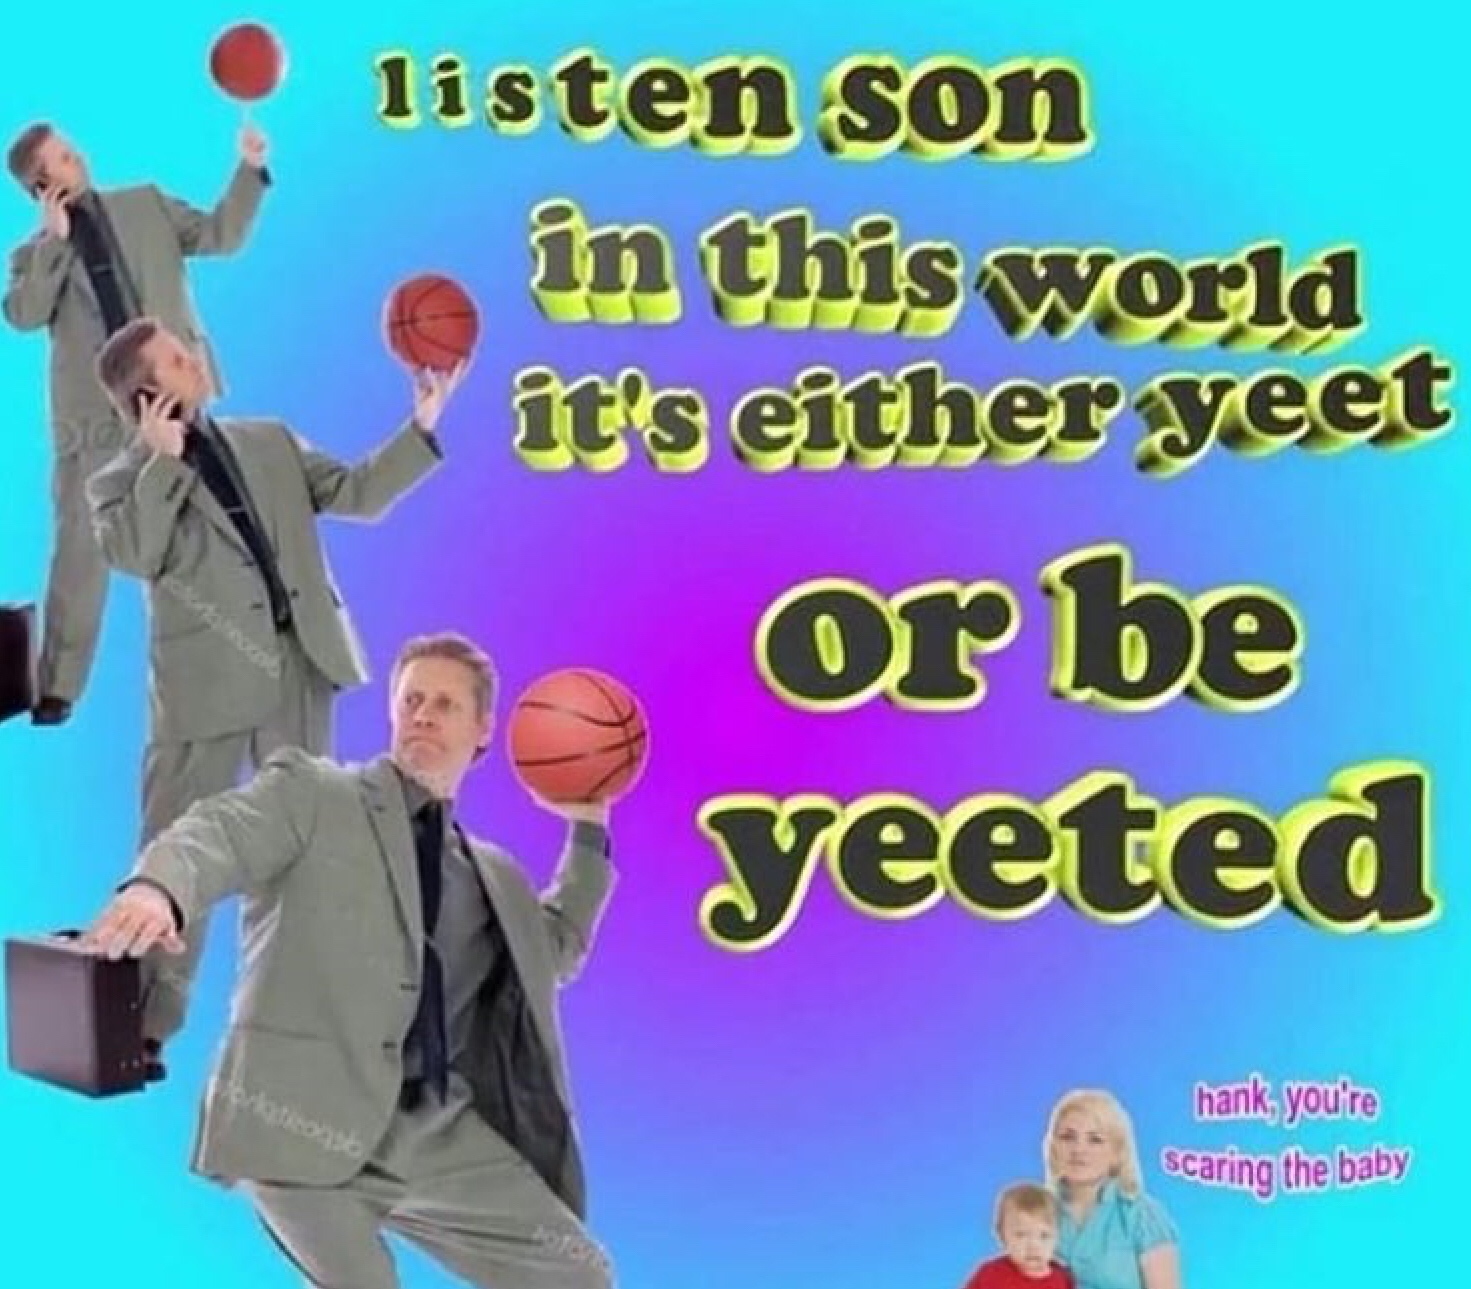 yeet myself off a bridge - listen son in this world it's either yeet or be yeeted hank, you're Scaring the baby